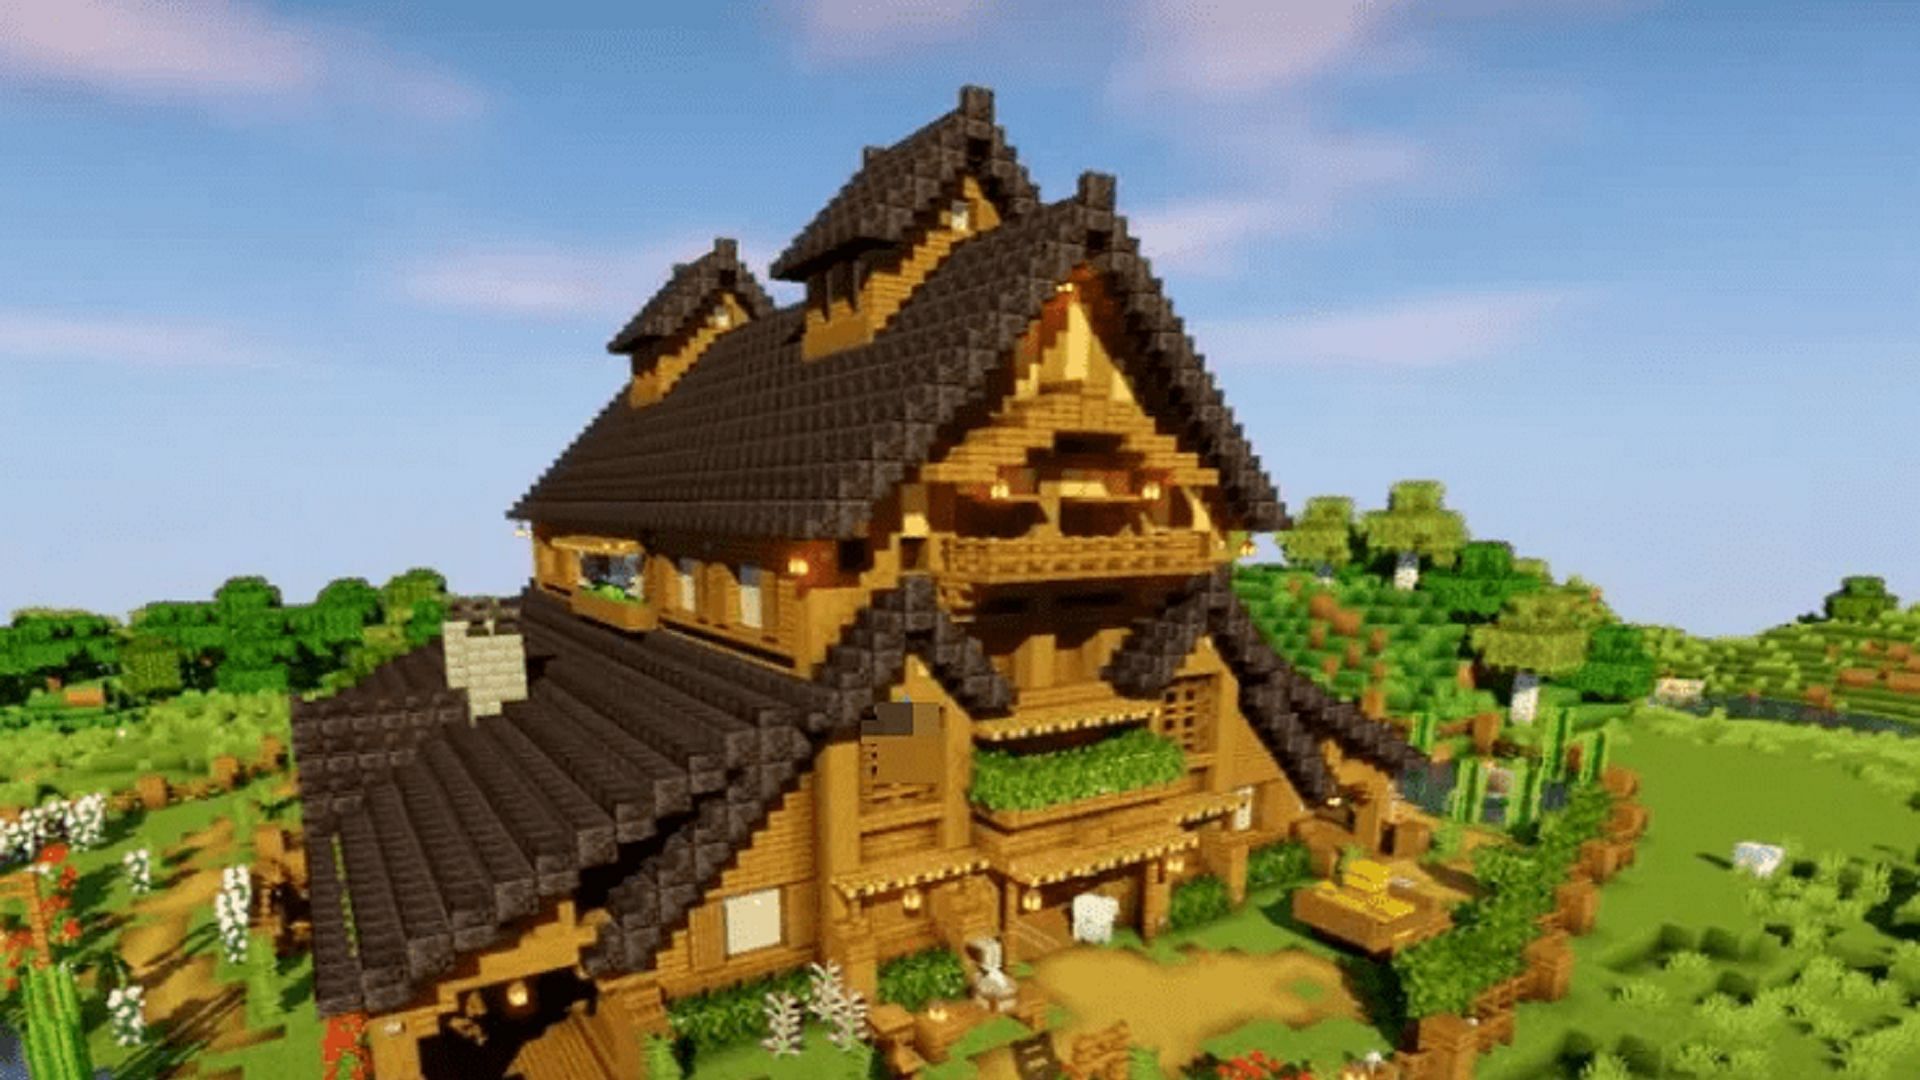 This barn design provides almost everything a player needs (Image via A1MOSTADDICTED MINECRAFT/YouTube)